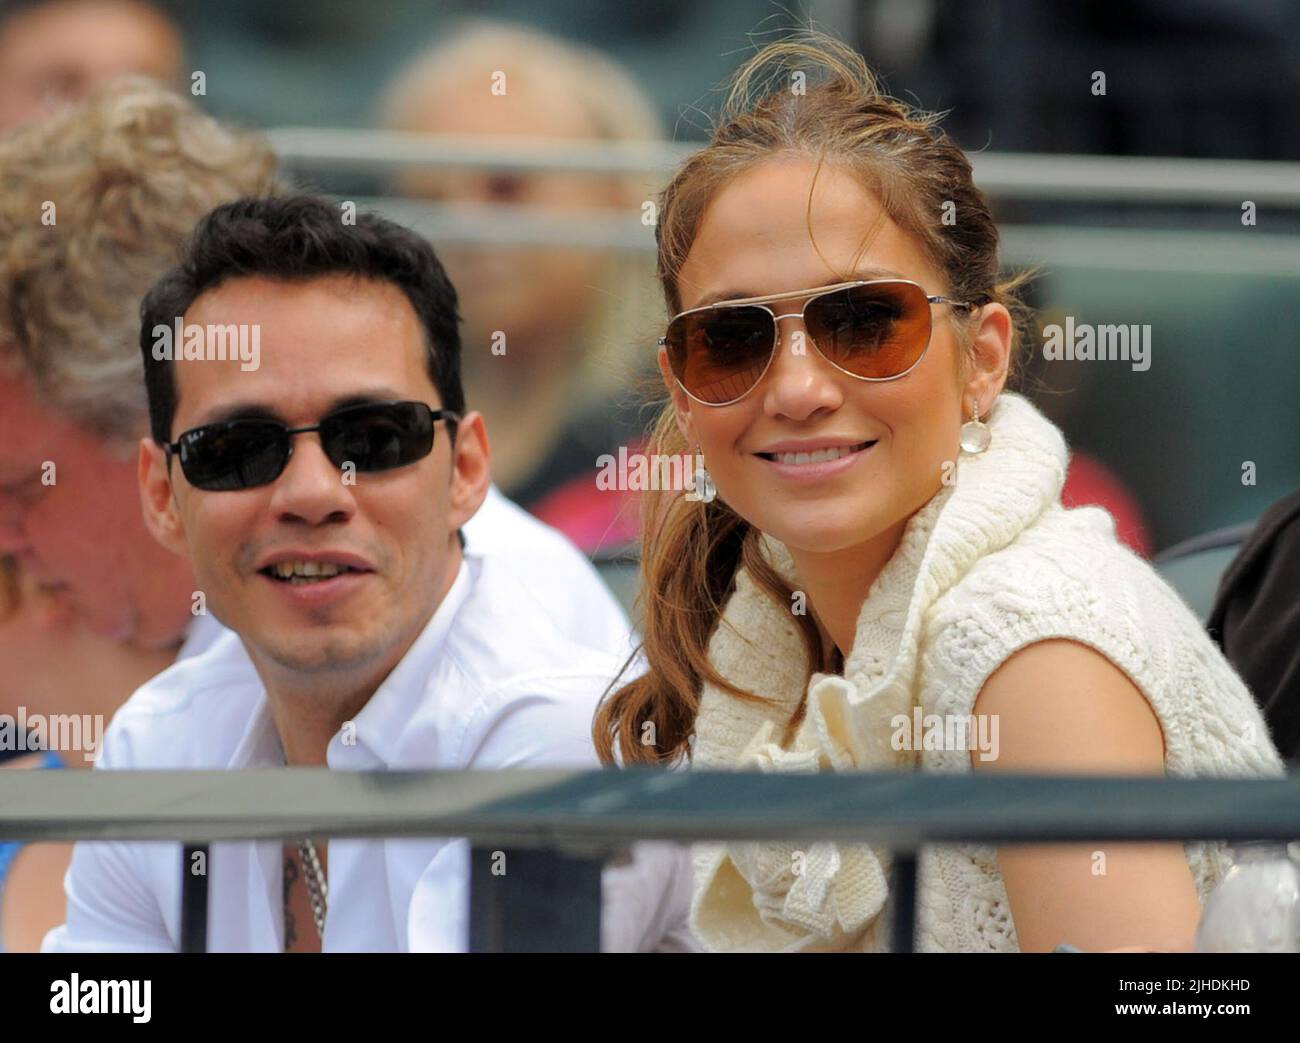 NEW YORK - JUNE 21;  Actress Jennifer Lopez and husband Marc Anthony watch the game between the Tampa Bay Rays and the New York Mets at CitiField. J-Lo looked a little tired and she frequently was caught yawning, and resting on Marcs shoulder. meanwhile Marc Anthony spent time picking his teeth. Jennifer was also seen picking off lint or dirt from marcs collar. The two than enjoyed some peanuts and candy as they watched the game with friend Carlos Beltran wife Jessica (black hair to the left of Jennifer)    on June 21, 2009 in Queens, New York  People:  Jennifer Lopez, Marc Anthony Stock Photo